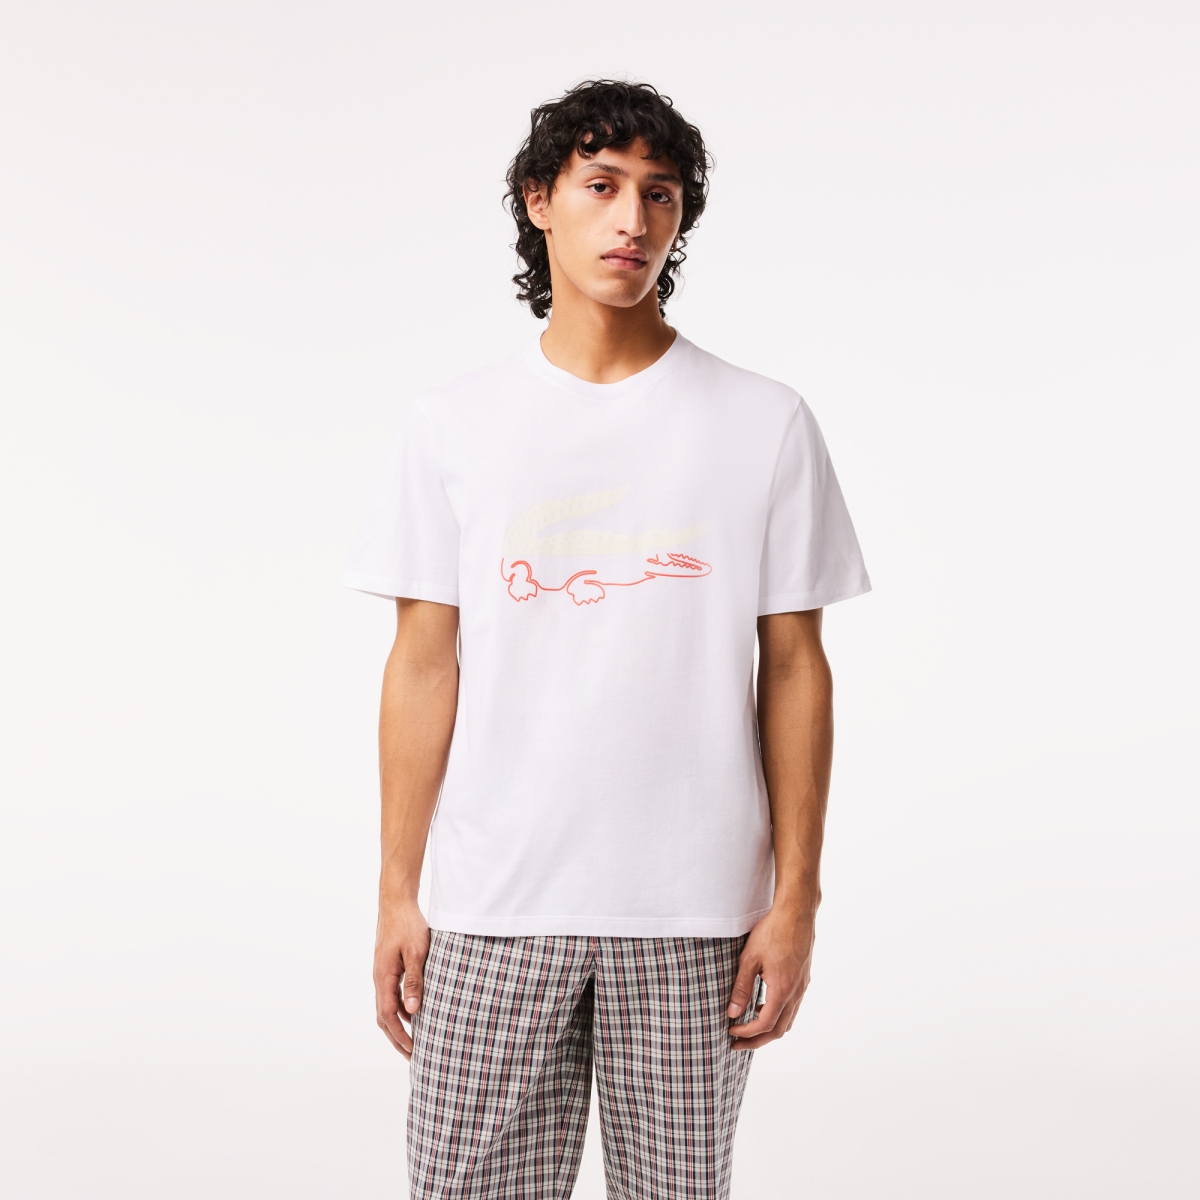 Jersey Lacoste Relaxed Fit - Jerseys Hombre